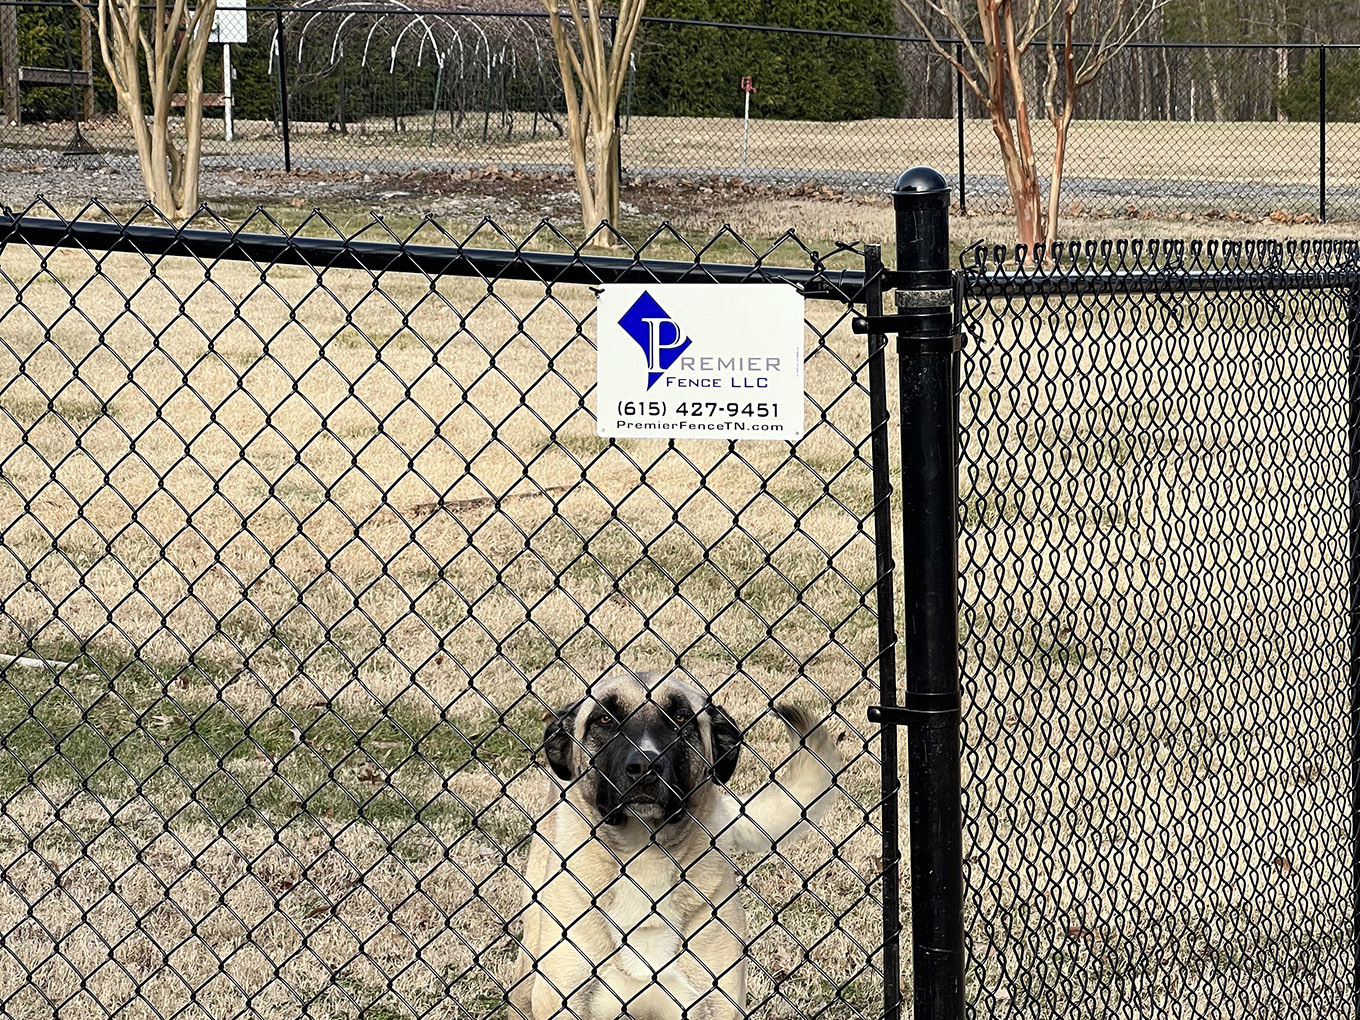 Photo of a chain link dog fence in Murfreesboro, TN